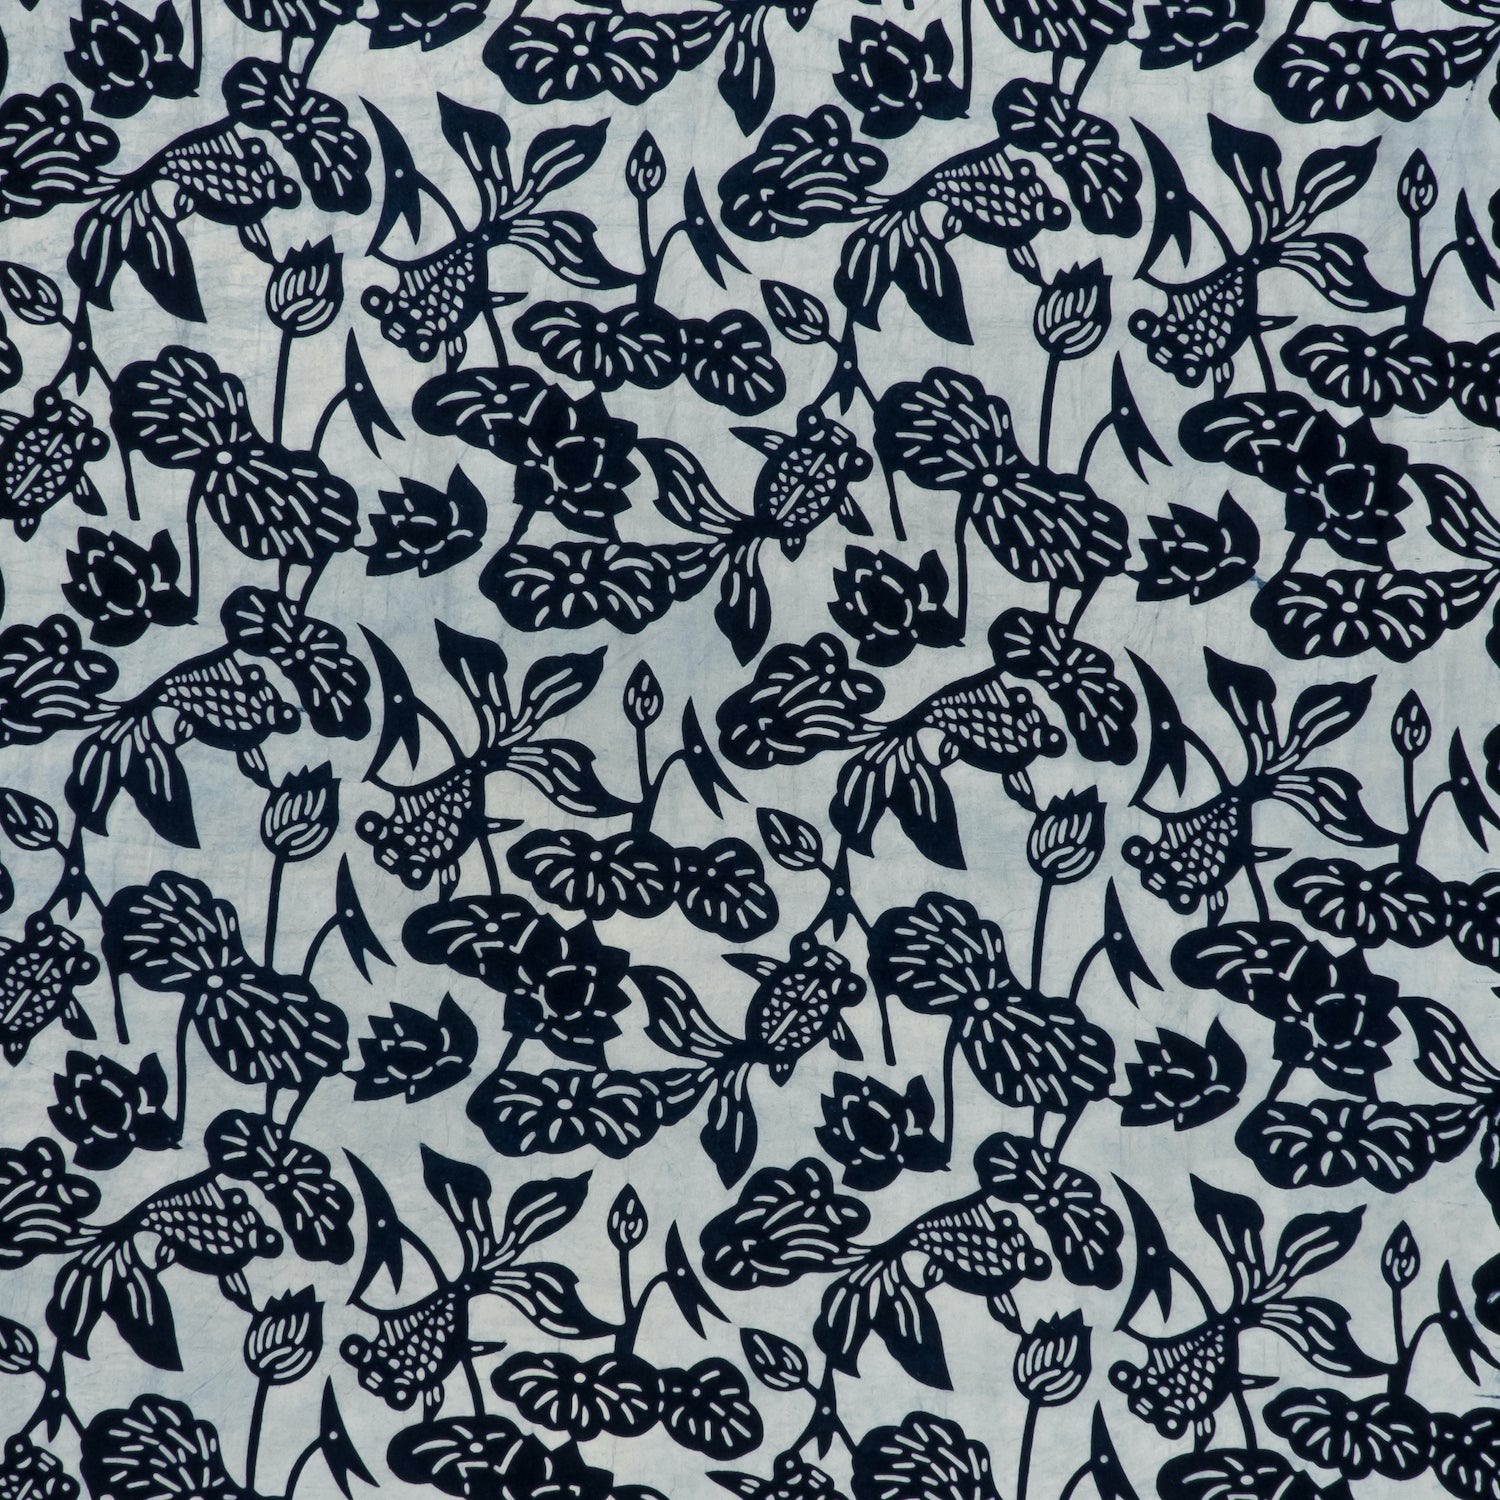 printed cotton fabric in a repeating fish and leaf pattern in indigo on a gray field.